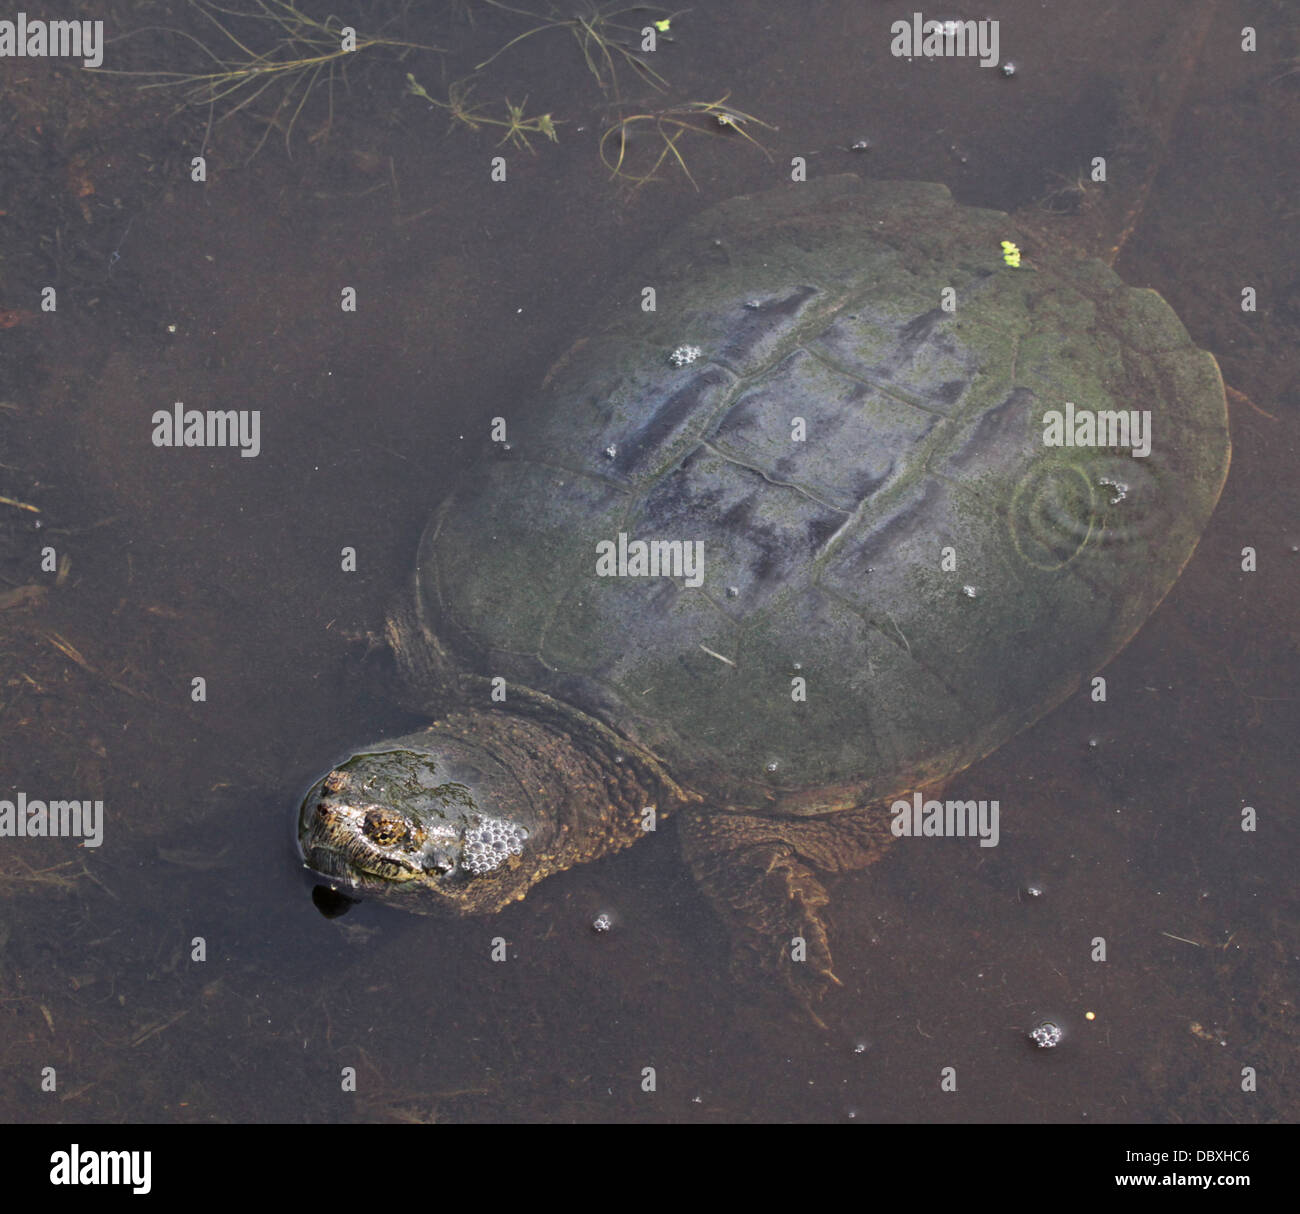 Snapping Turtle Body Stock Photo